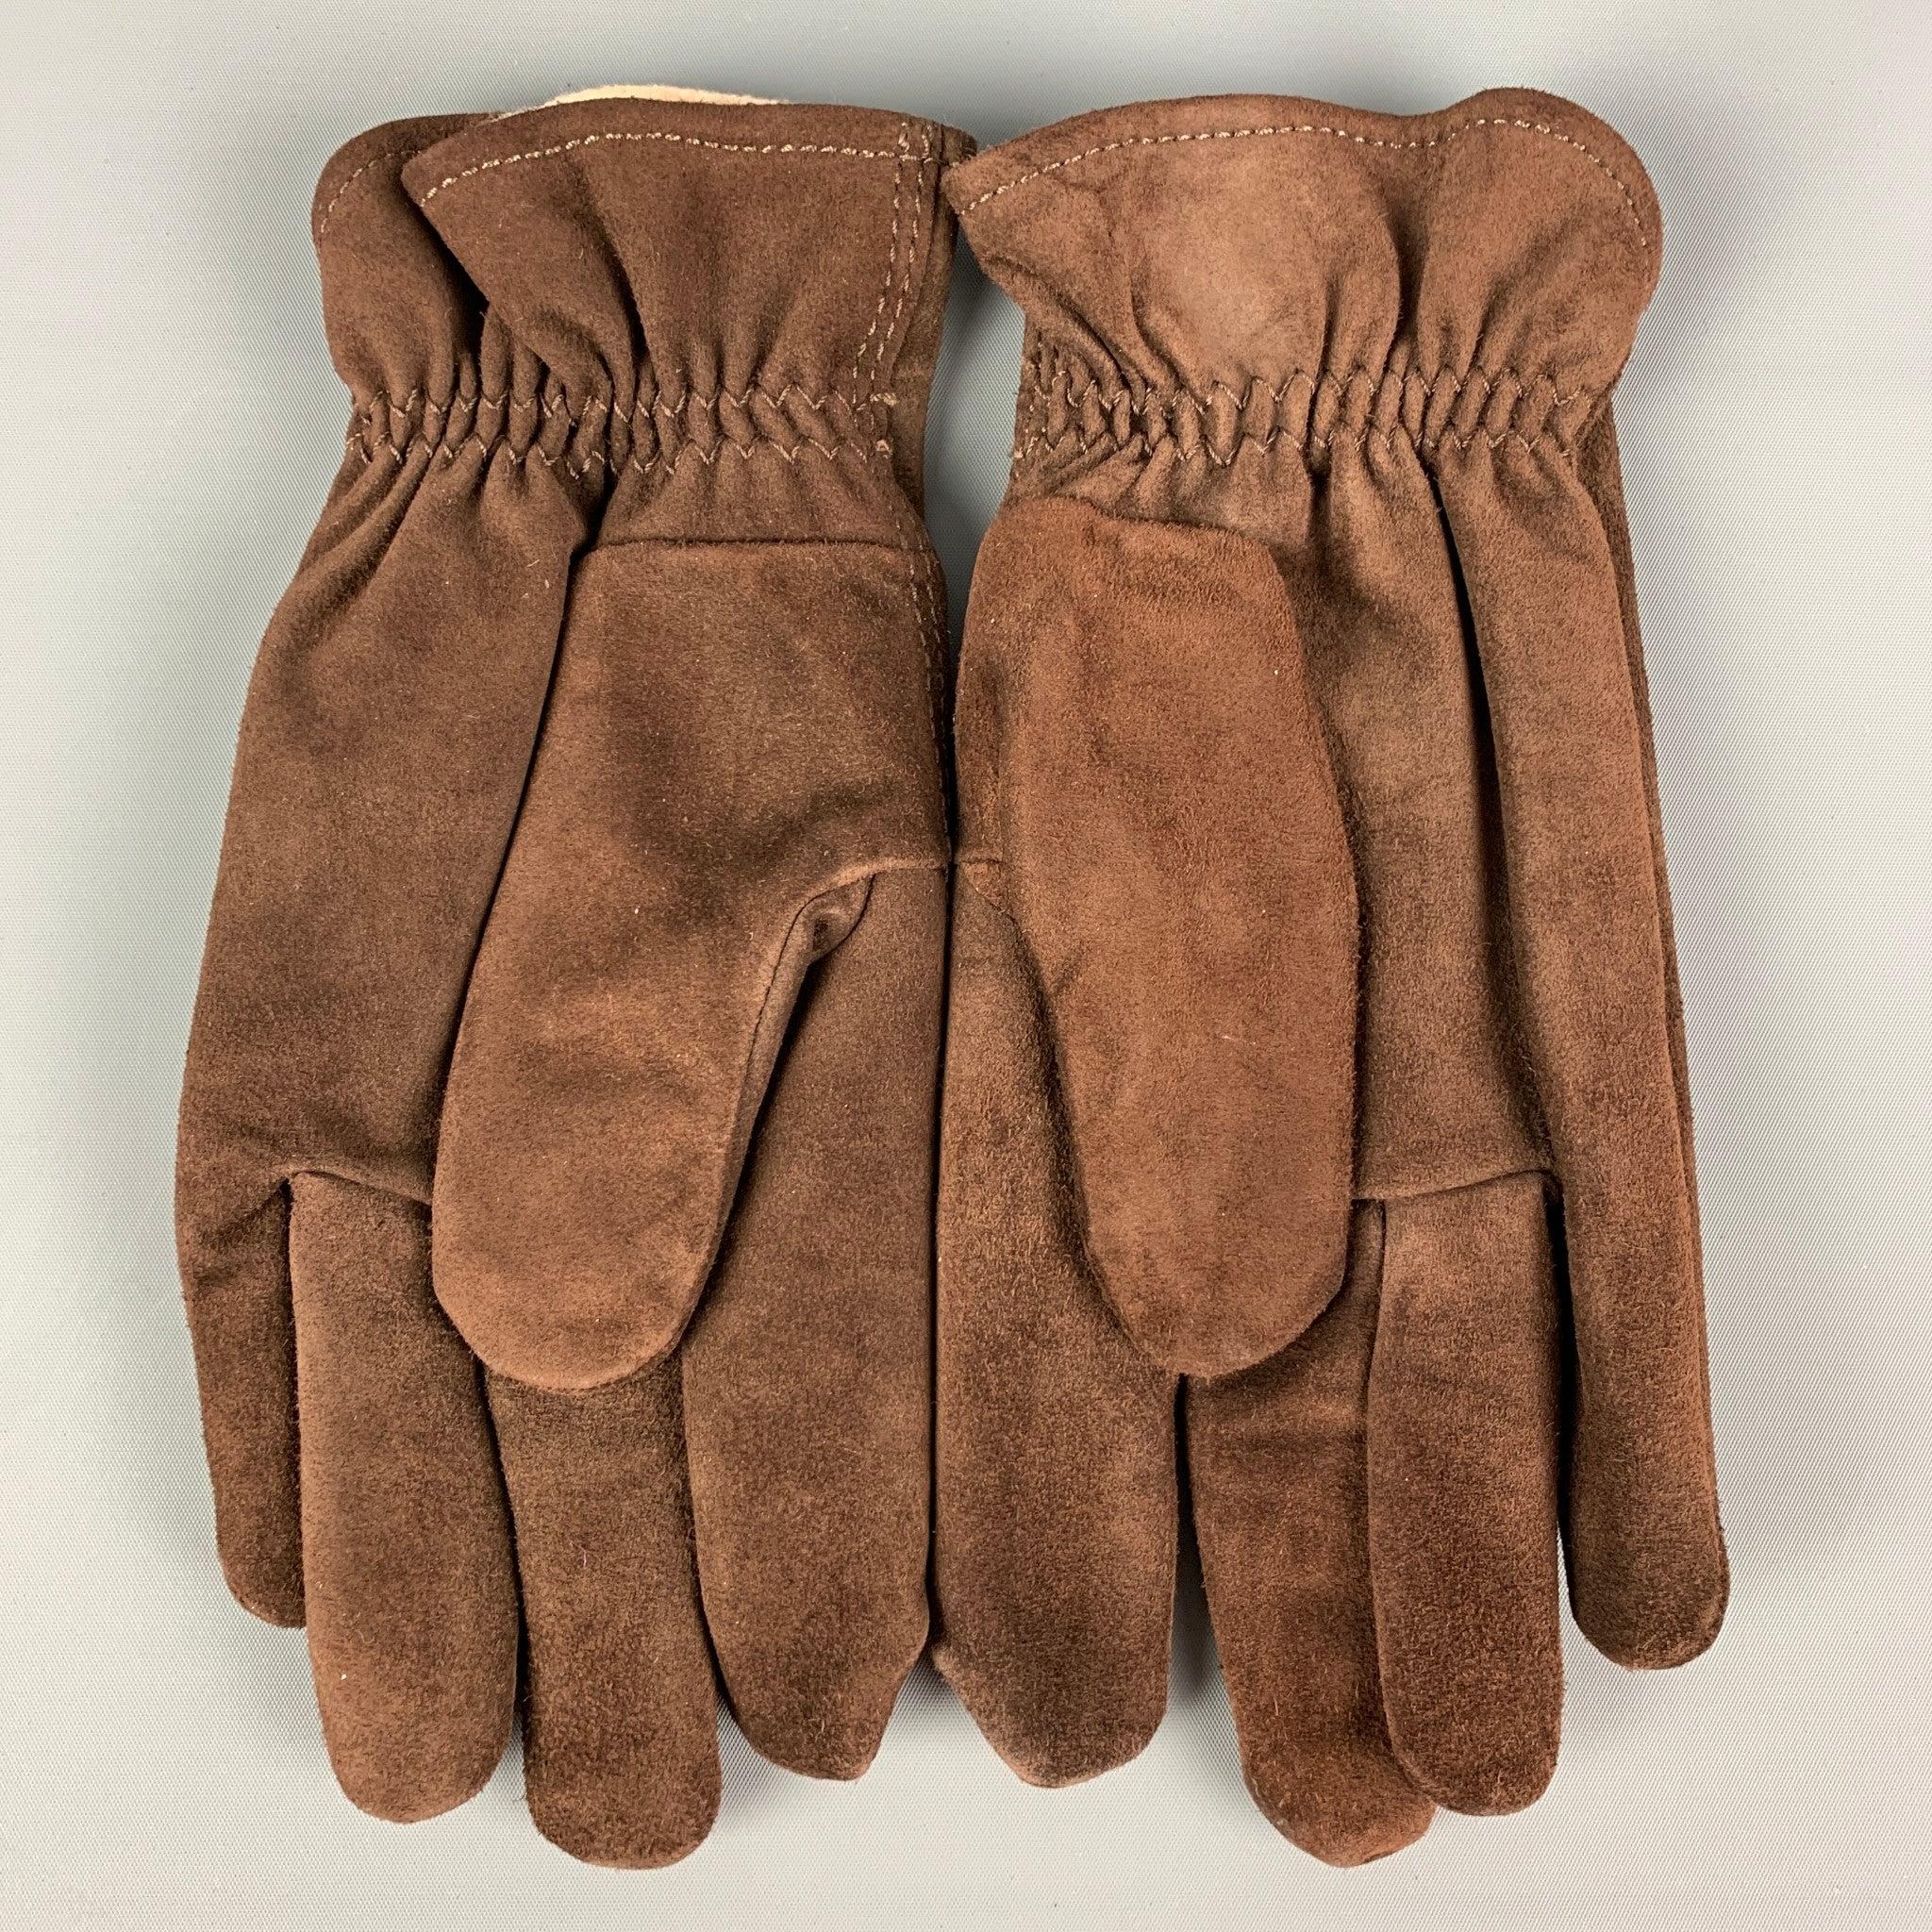 HUGO BOSS gloves comes in a brown suede with a cotton lining featuring top stitching.
Very Good
Pre-Owned Condition. 

Marked:   S 

Measurements: 
  Width: 4 inches  Length:
10 inches 
  
  
 
Reference: 120444
Category: Gloves
More Details
   